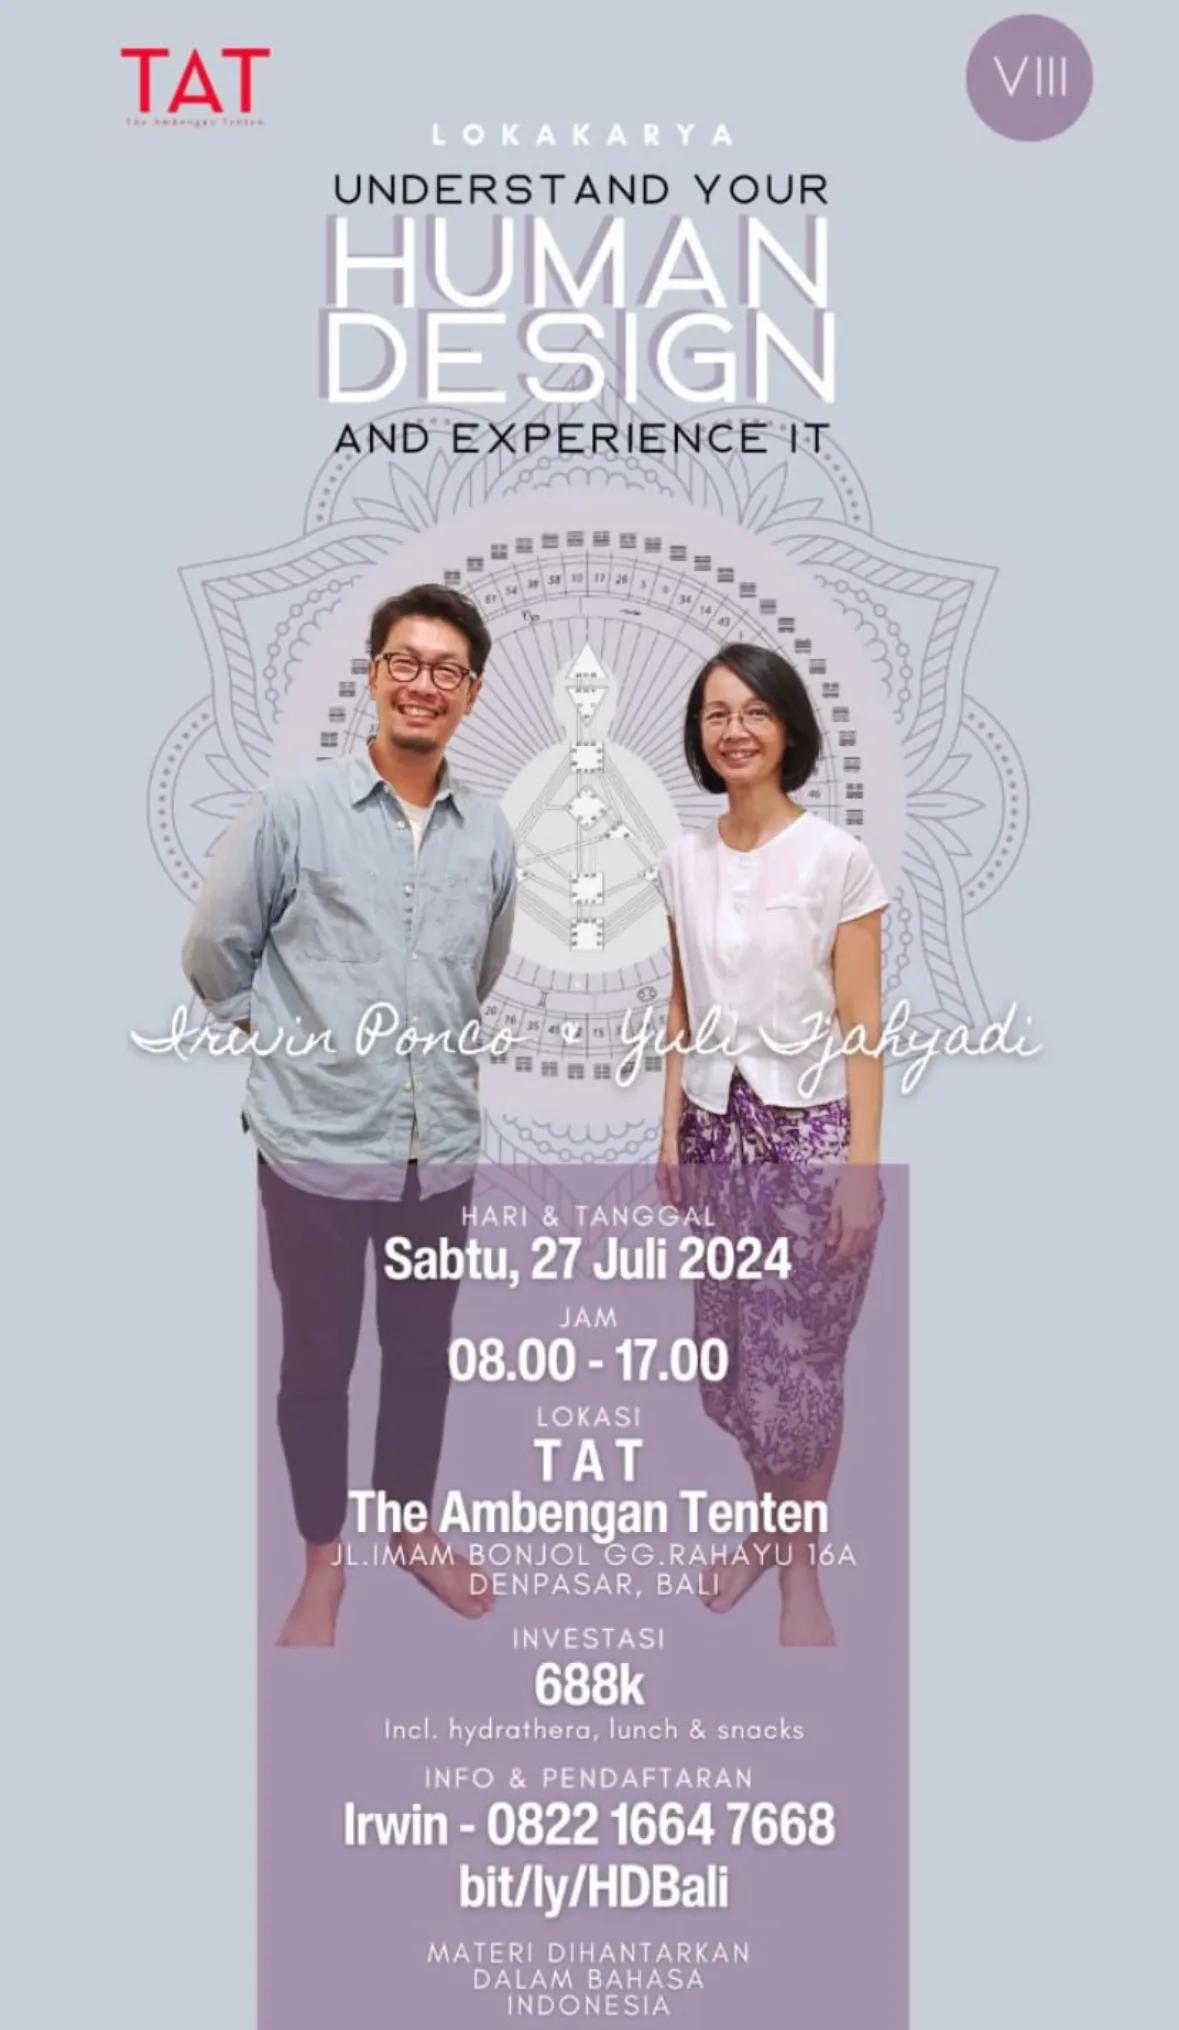 Event at The Ambengan Tenten on July 27 2024: Understand Your Human Design And Experience It